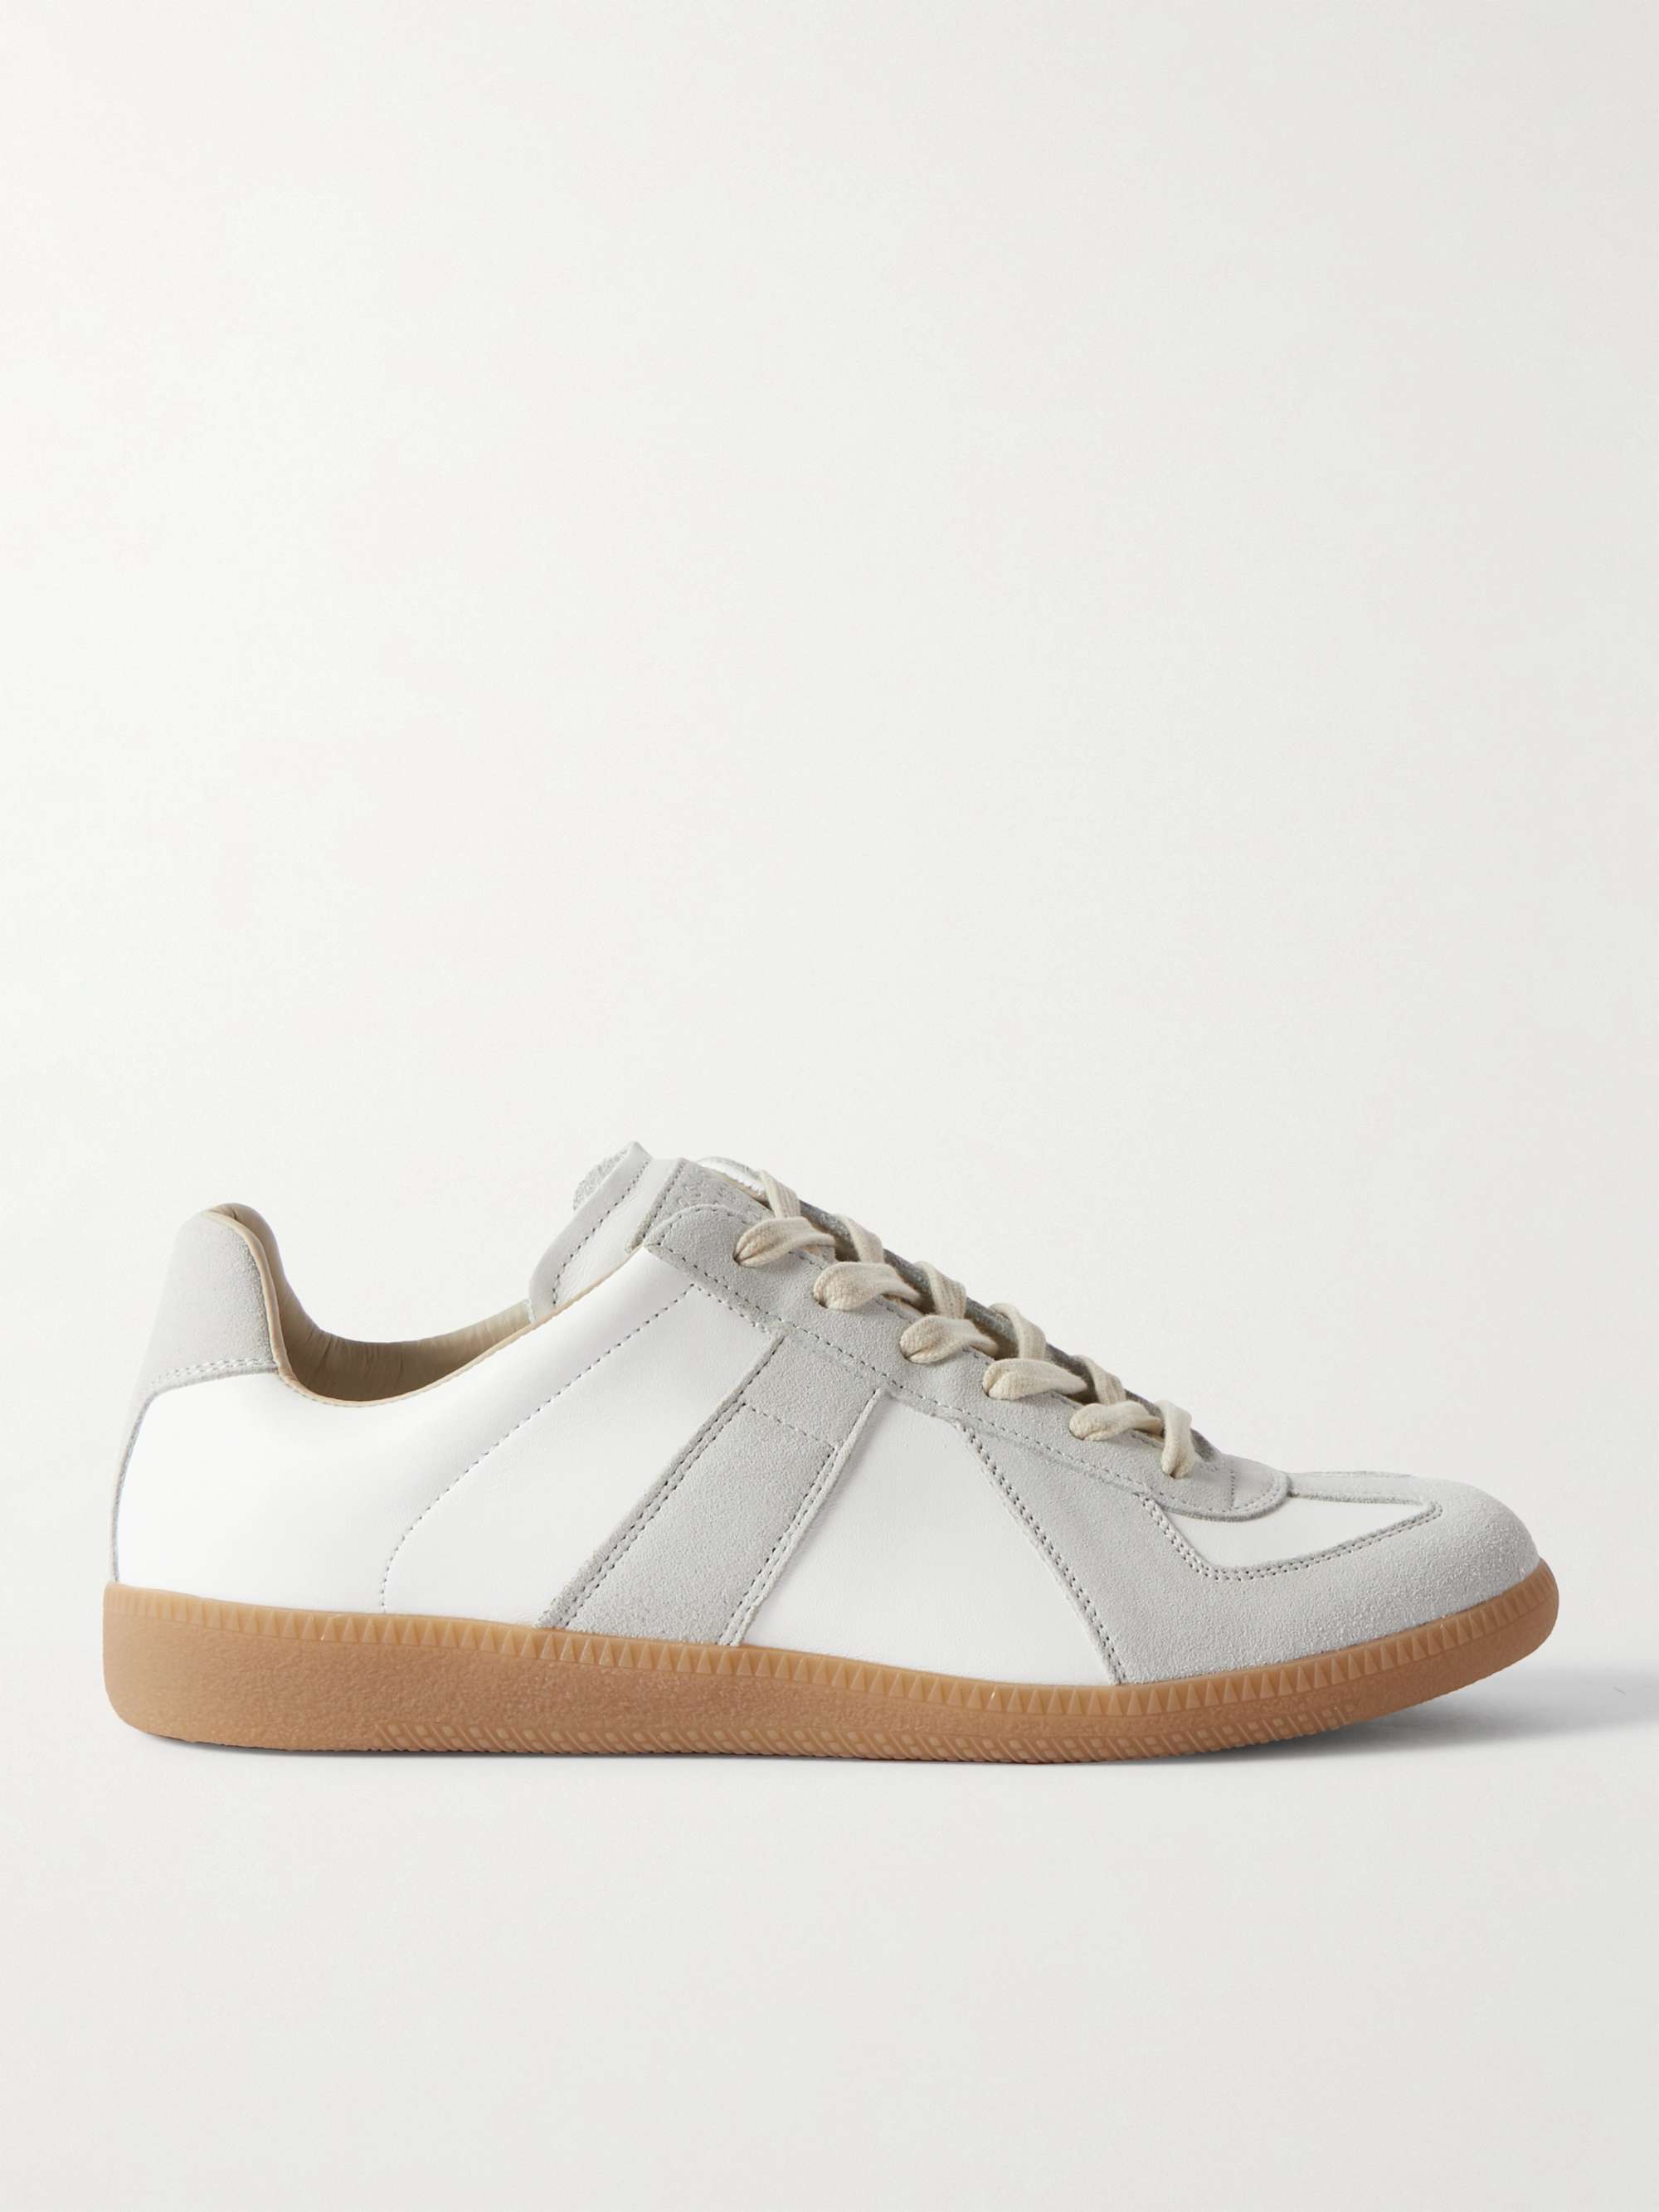 MARGIELA Replica Leather and Suede Sneakers | MR PORTER